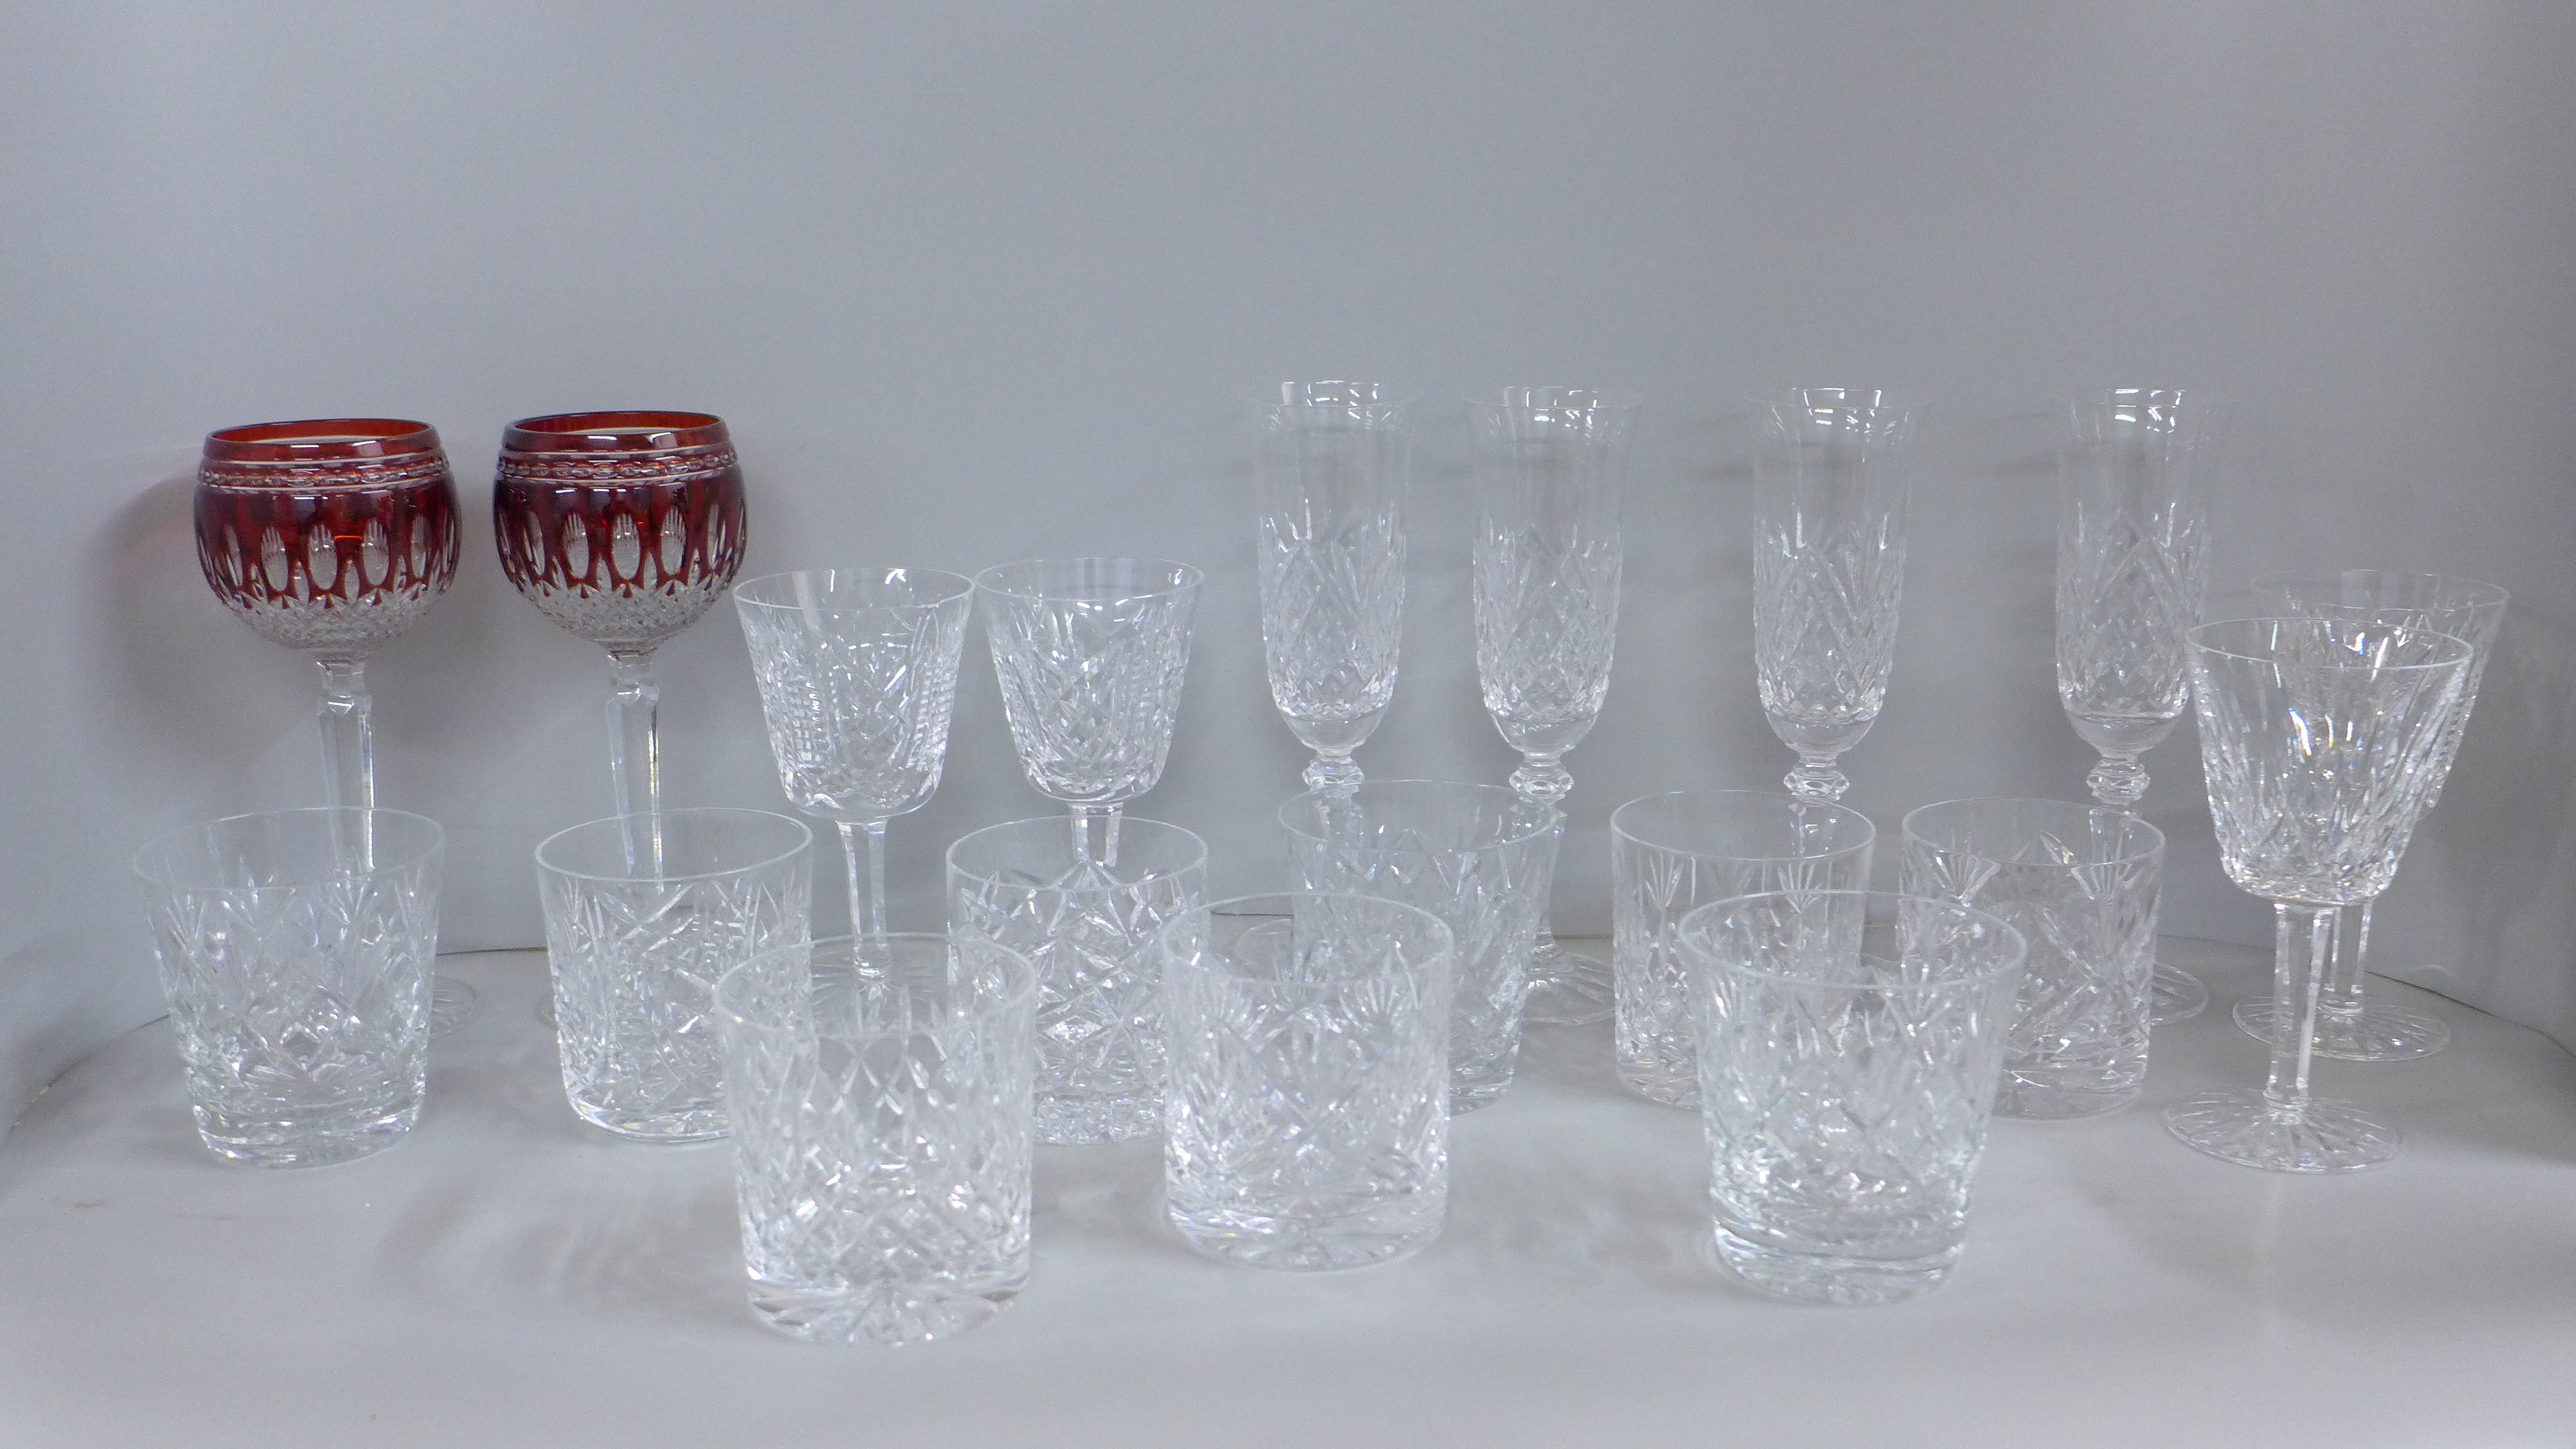 A collection of lead crystal glass including four Galway champagne flutes, four Waterford Crystal